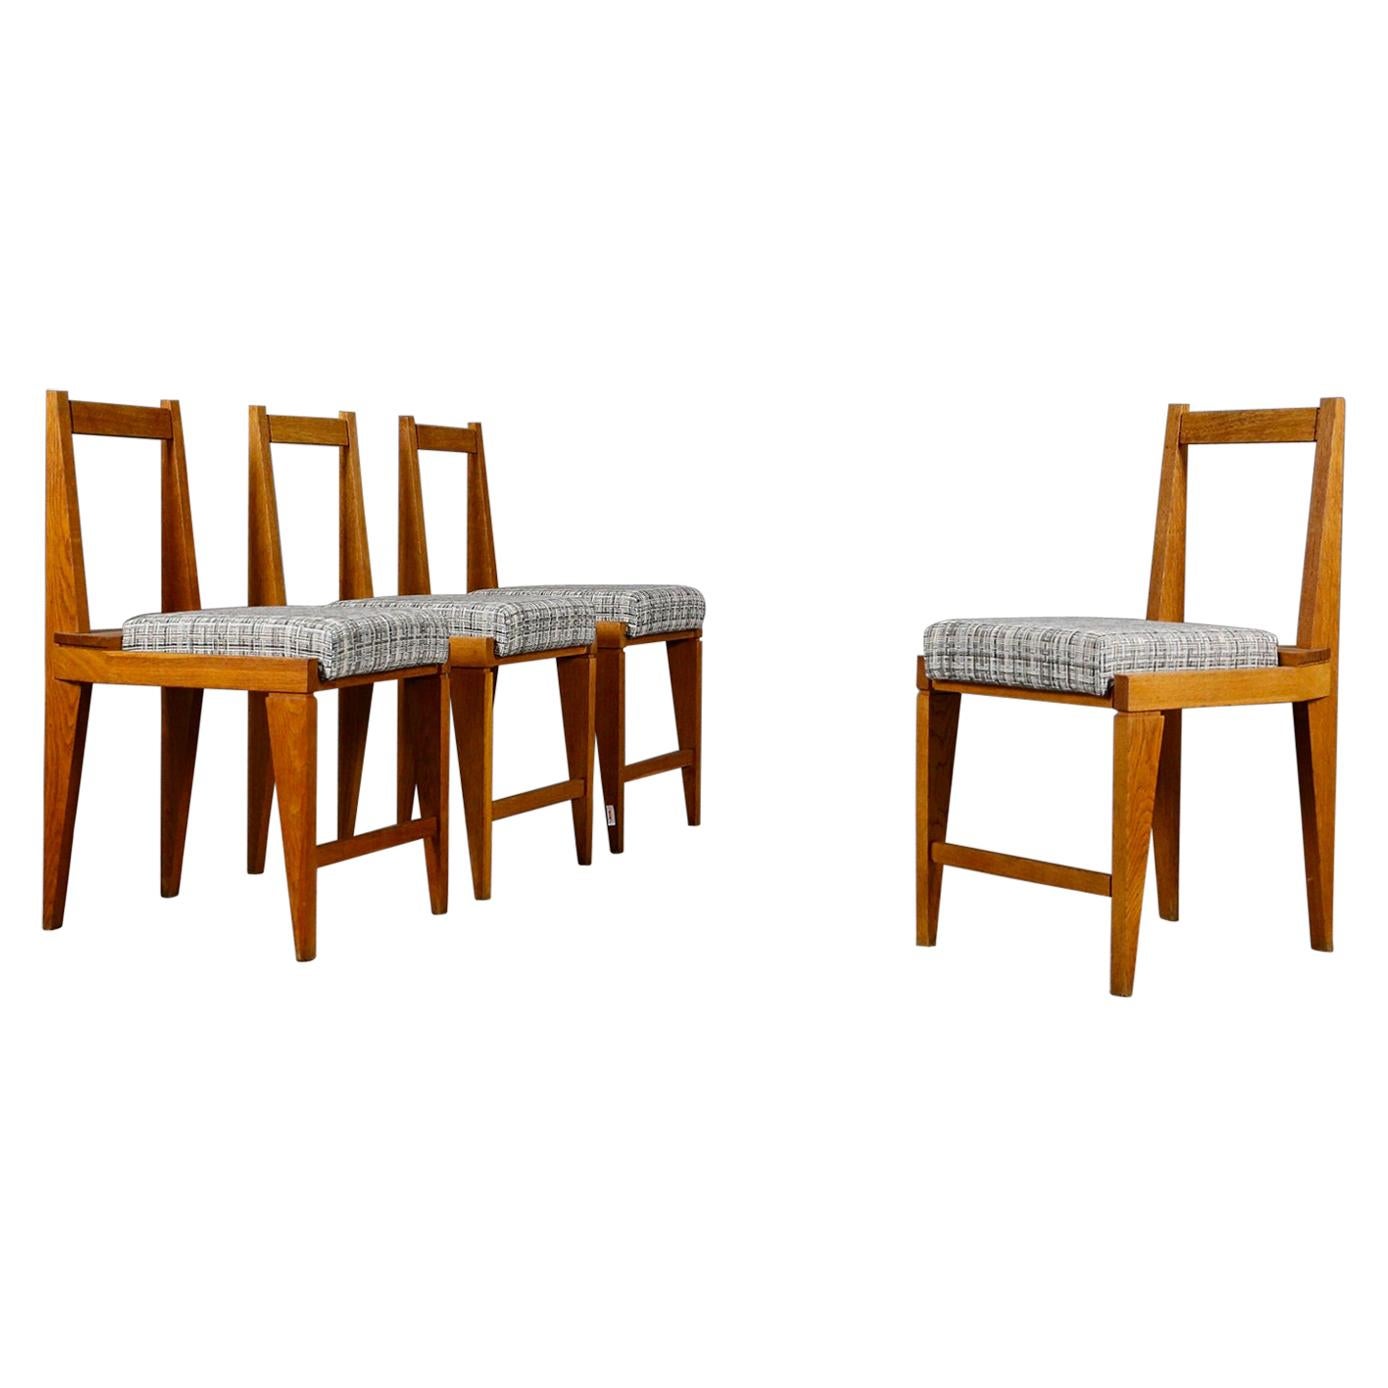 Set of Four Midcentury Chairs by Augusto Romano